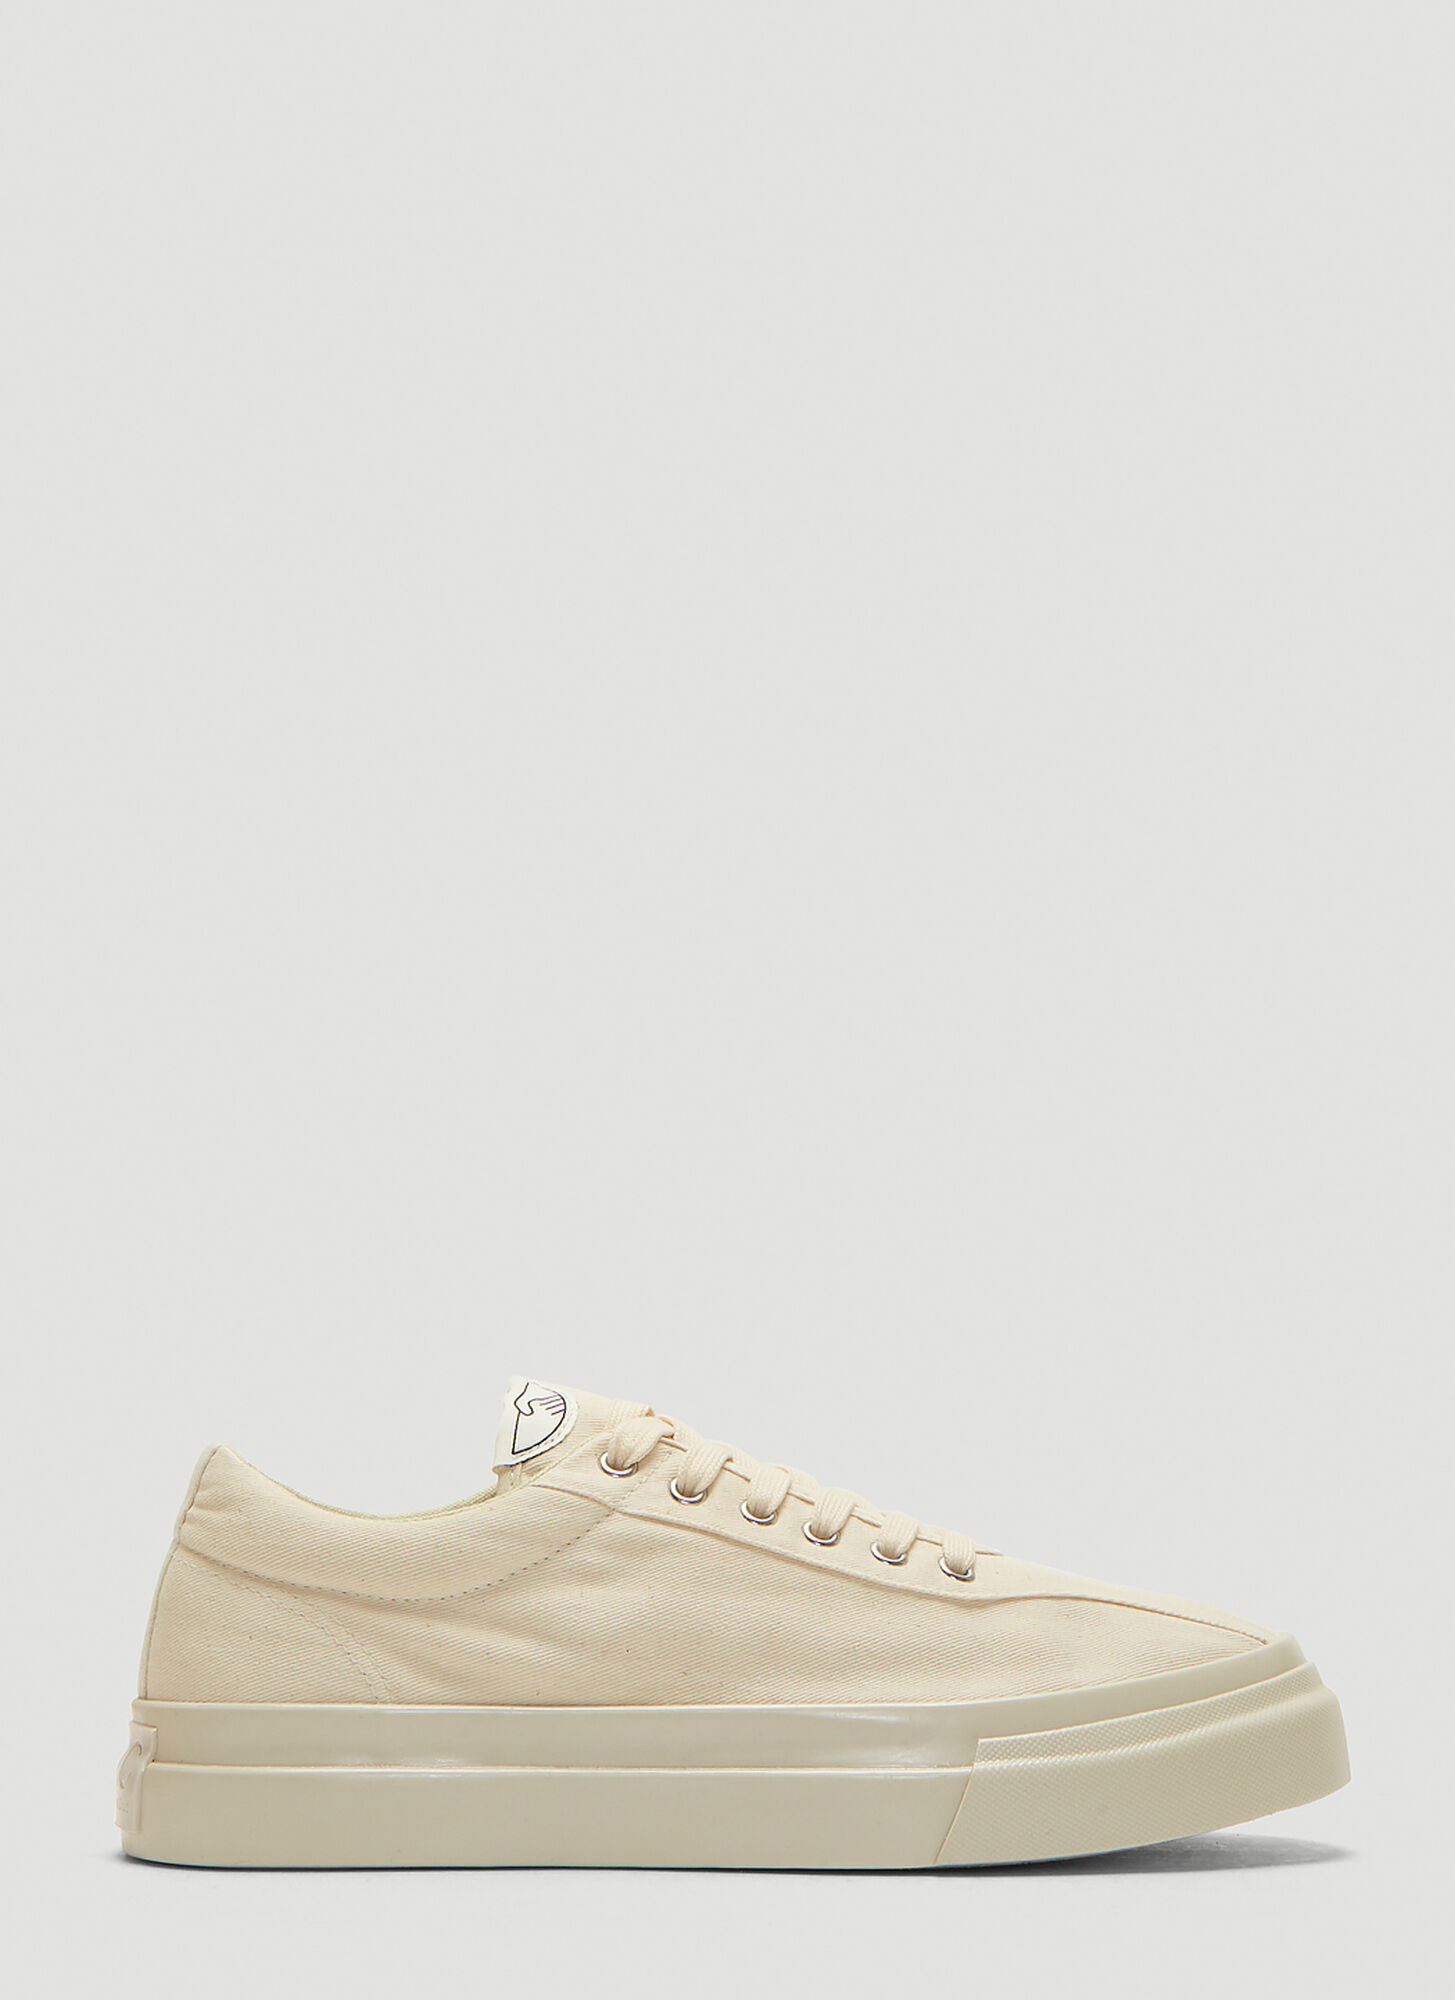 S.w.c Dellow Canvas Trainers In Beige